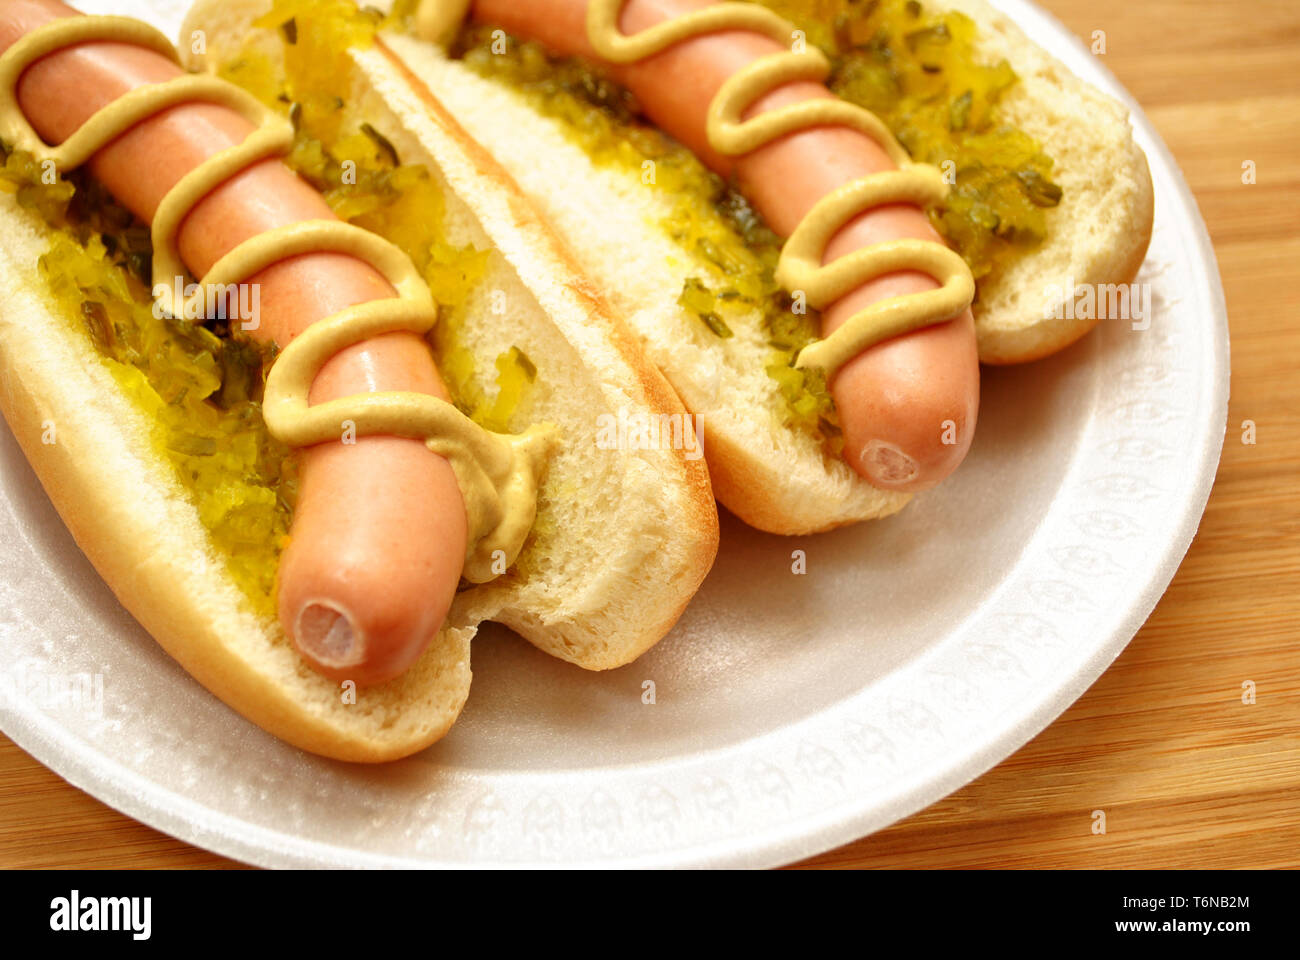 Hot Dogs with Relish and Mustard On a White Plate Stock Photo